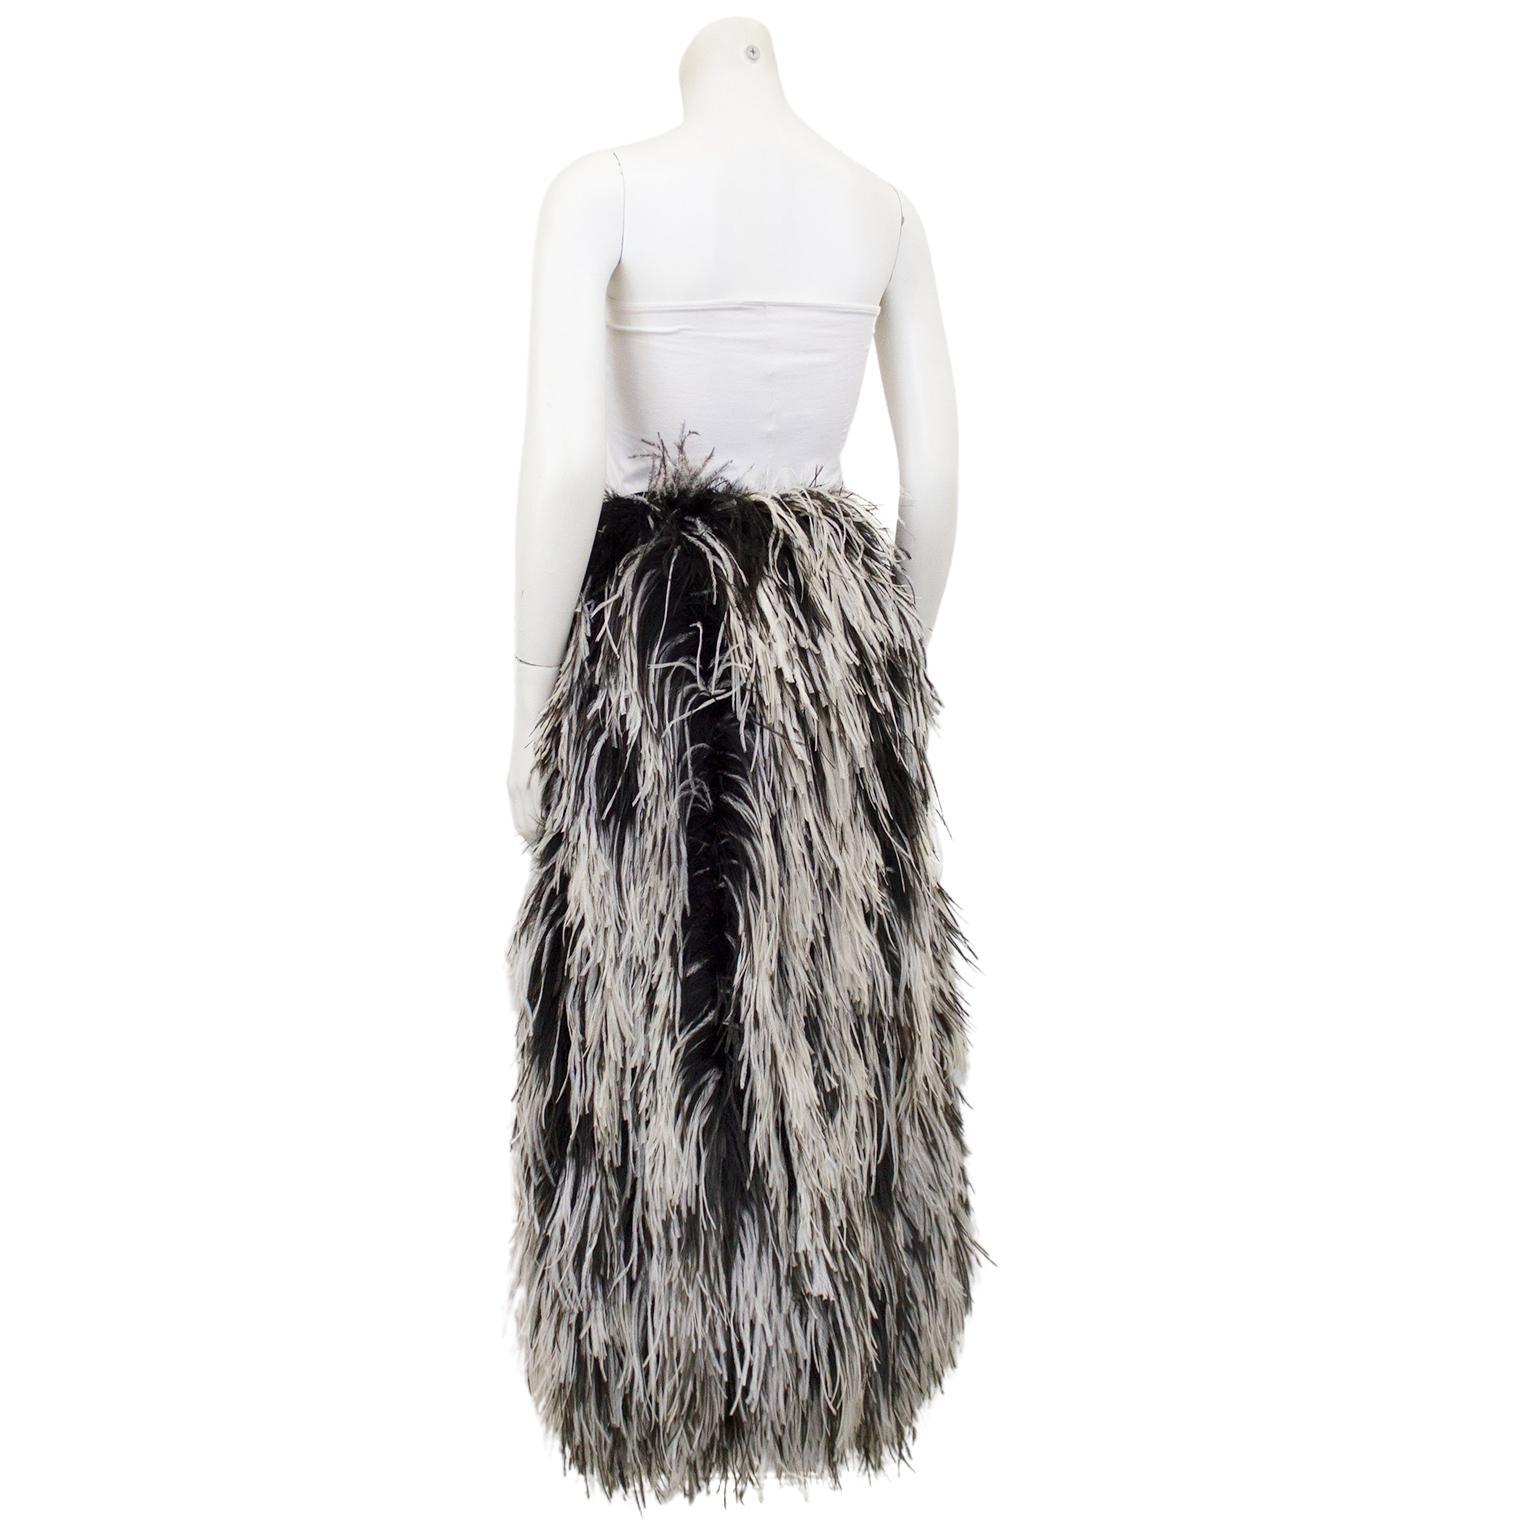 The most fabulous skirt ever. 1960's Saks Fifth Avenue, featuring all over black and white ostrich feathers. The skirt is straight line style, however the feathers add lots of volume and personality. High waisted with black lining and a black fabric